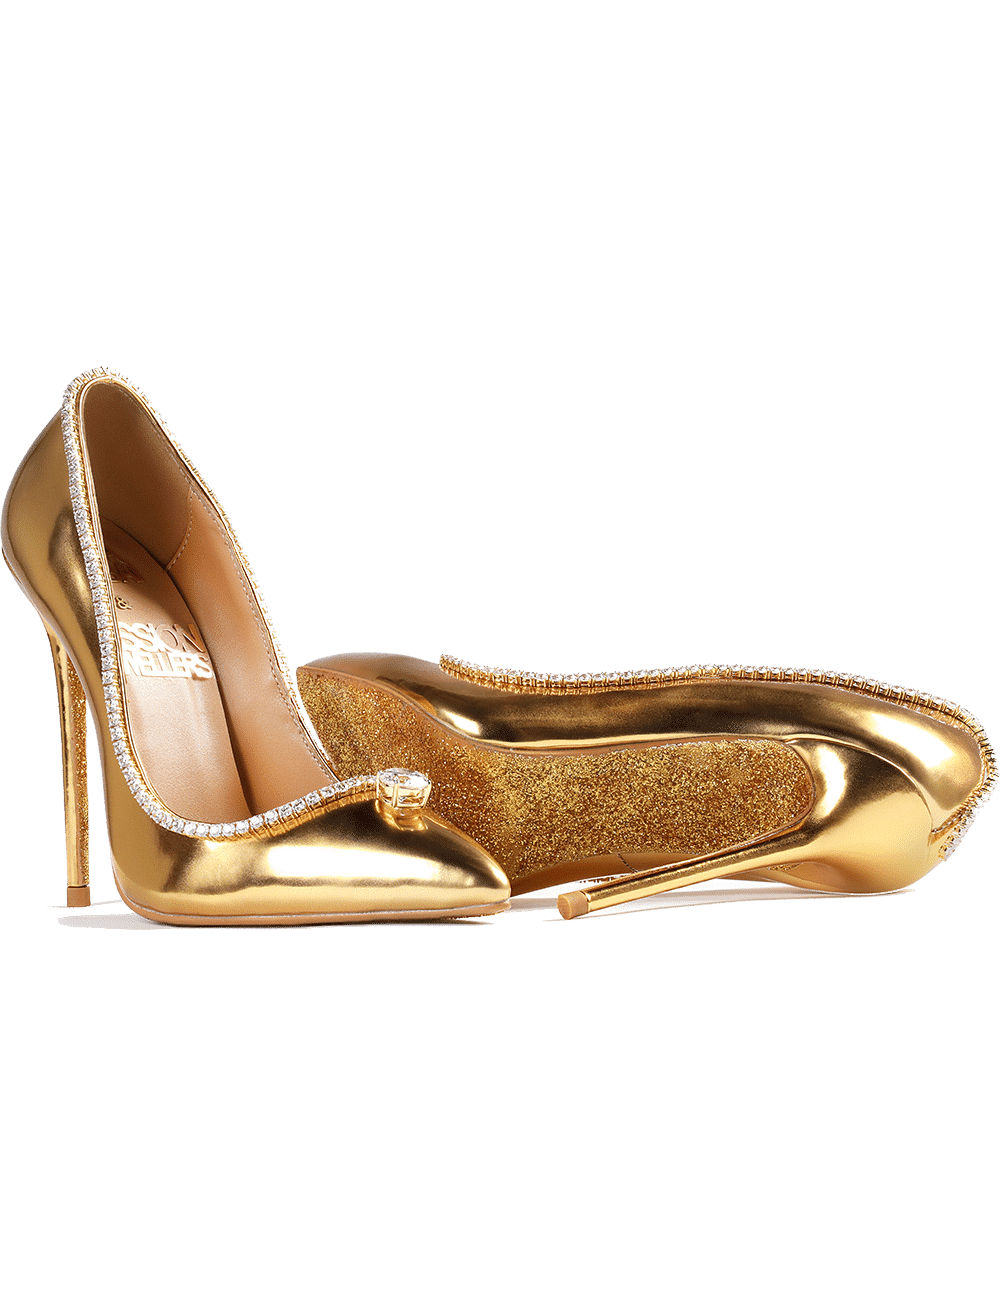 The Most Expensive Women's Designer Shoes in the World﻿